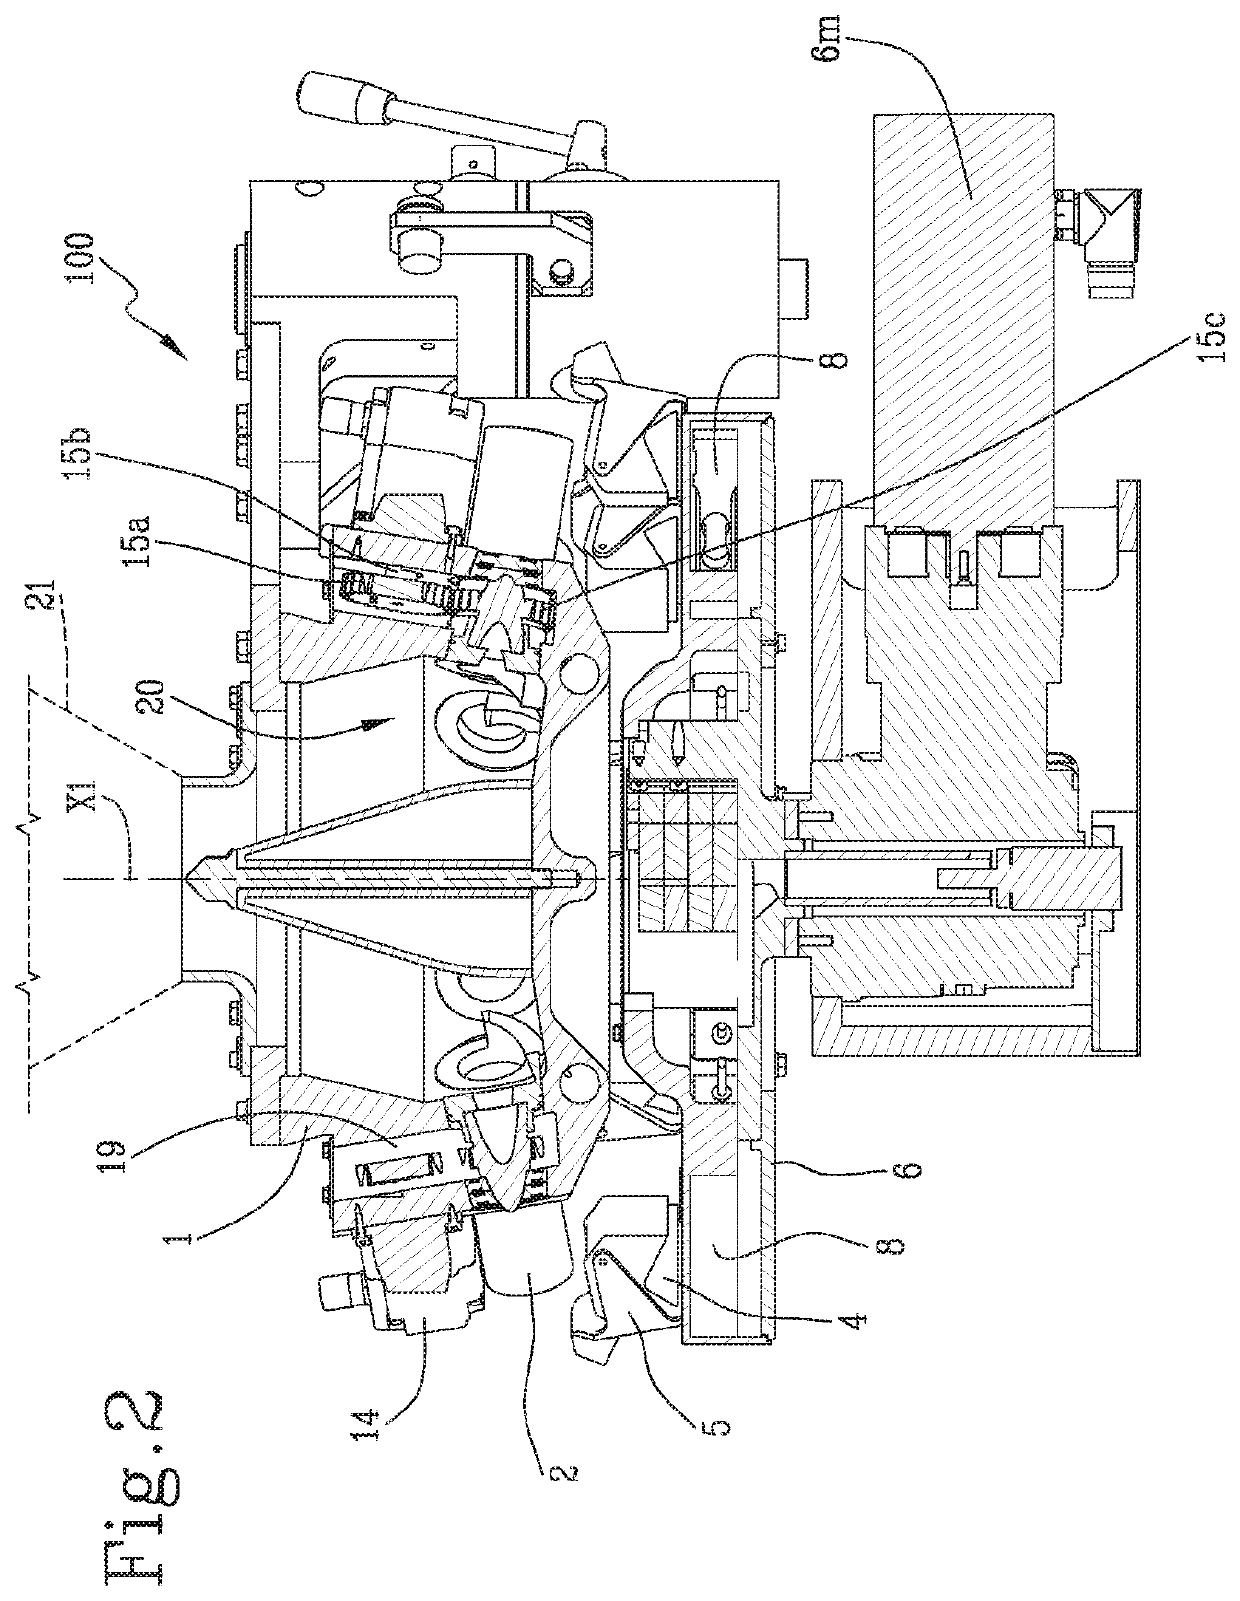 Dosing device for feeding an infusion product